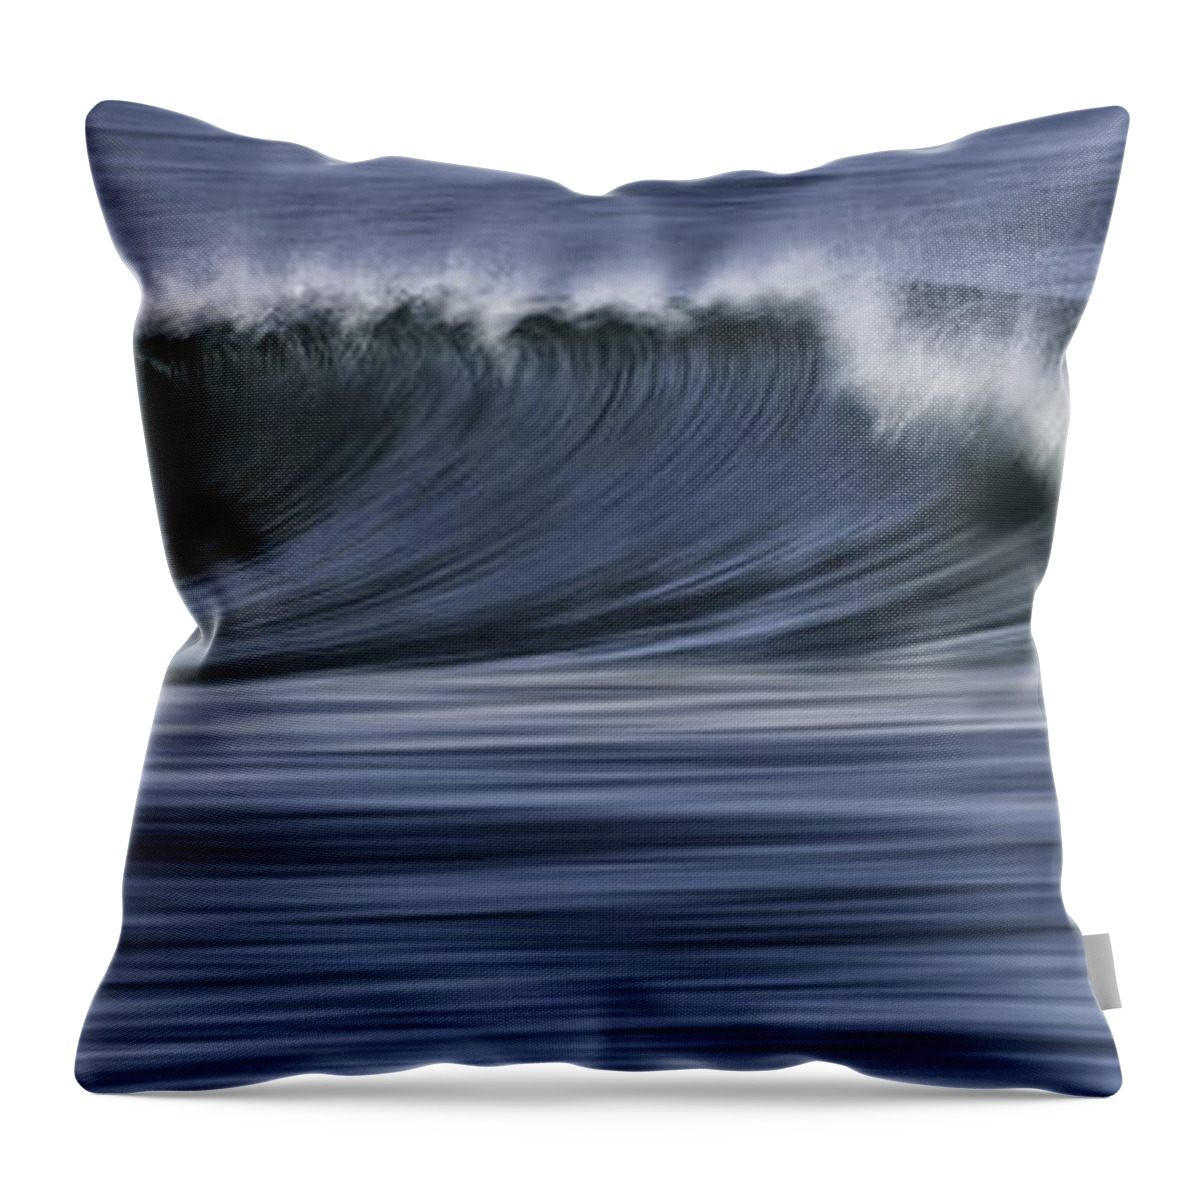 Drakes Beach Throw Pillow featuring the photograph Drakes Beach Wave by Don Hoekwater Photography